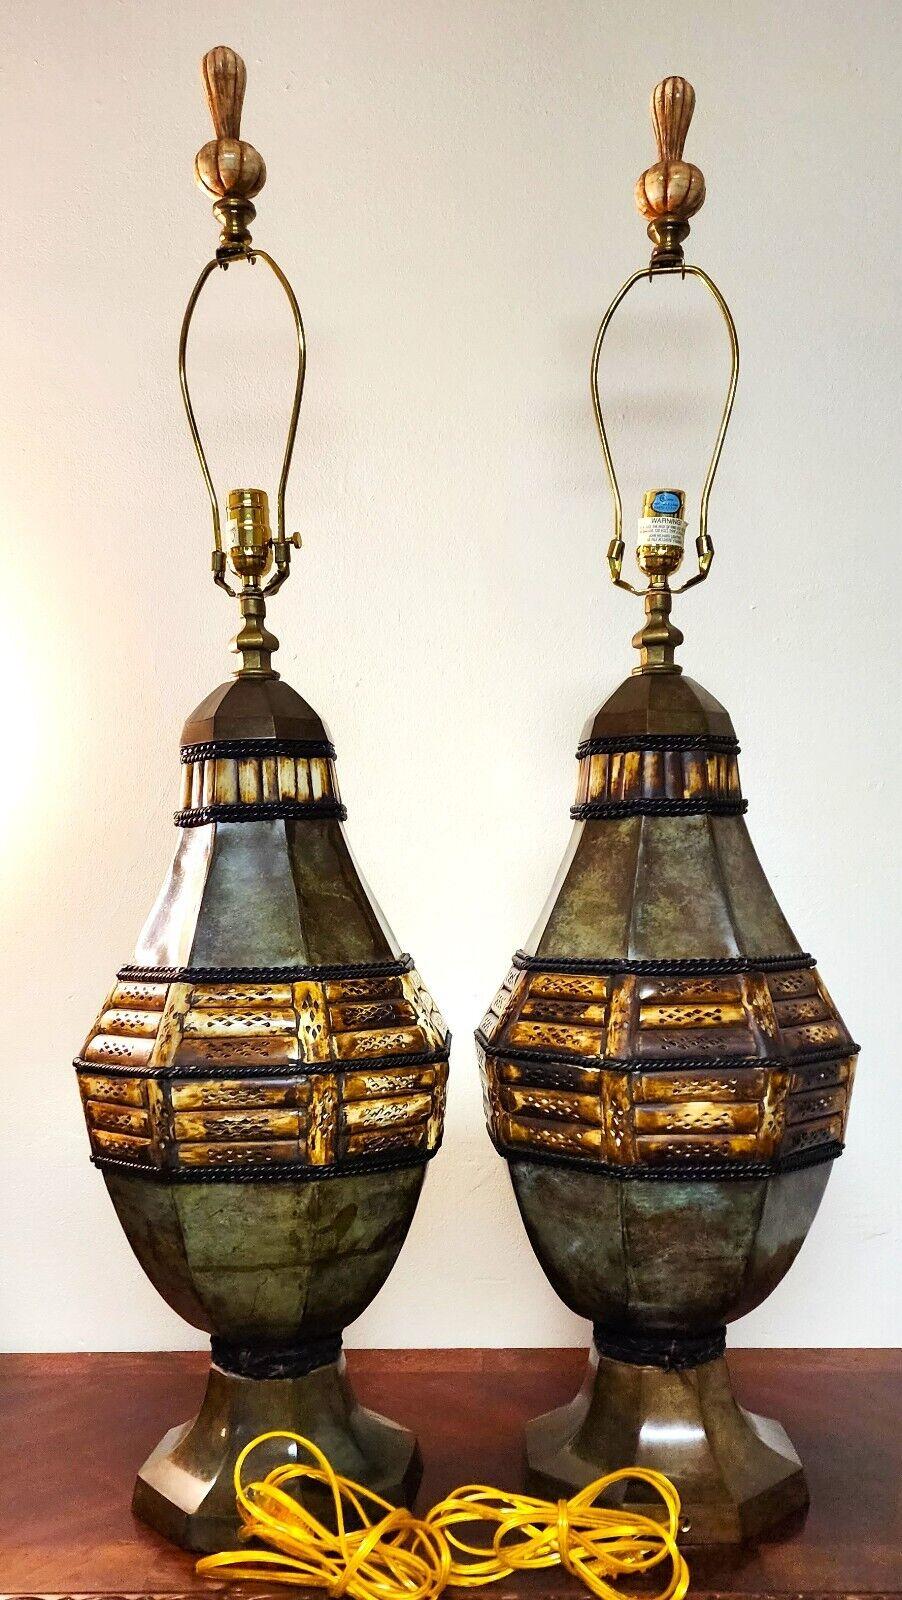 For FULL item description click on CONTINUE READING at the bottom of this page.

Offering One Of Our Recent Palm Beach Estate Fine Lighting Acquisitions Of A
Pair of Large Italian Spanish Style Table Lamps
These are heavy, substantial lamps and will